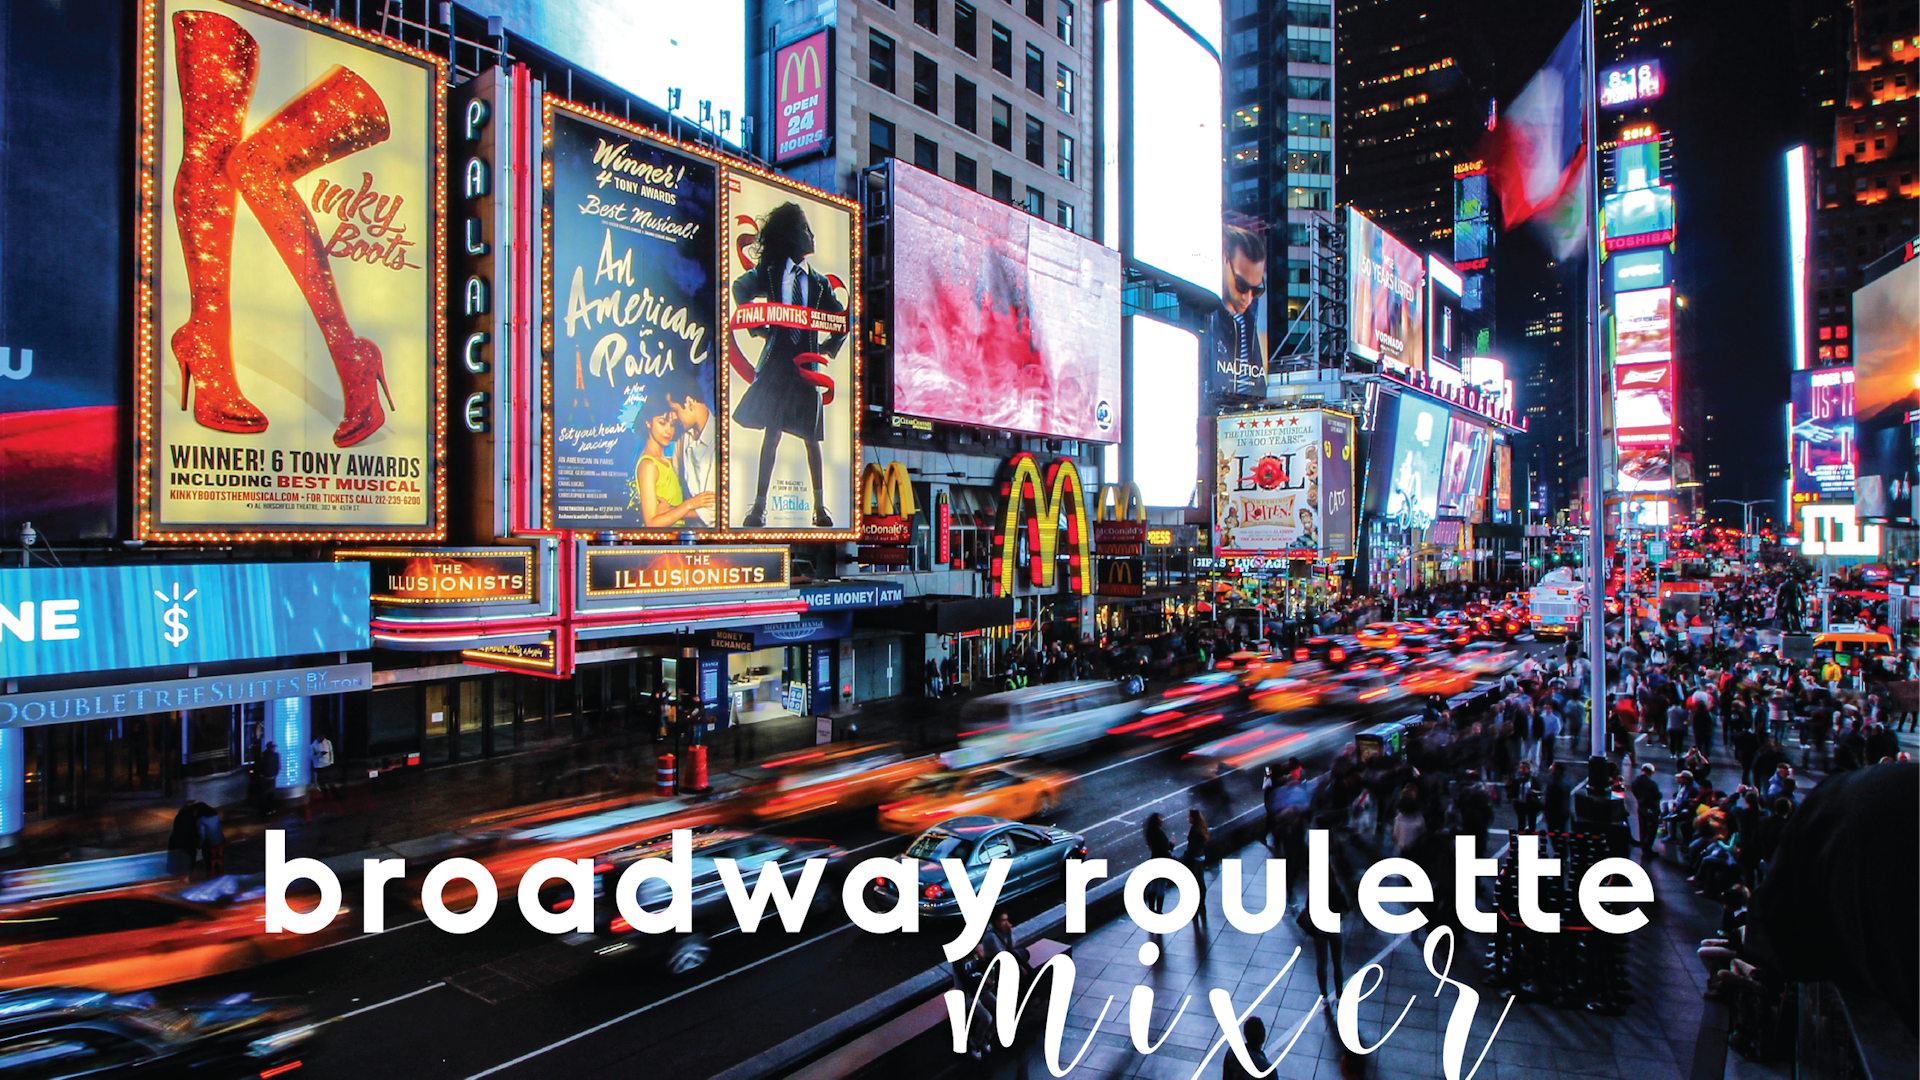 broadway roulette virtual event